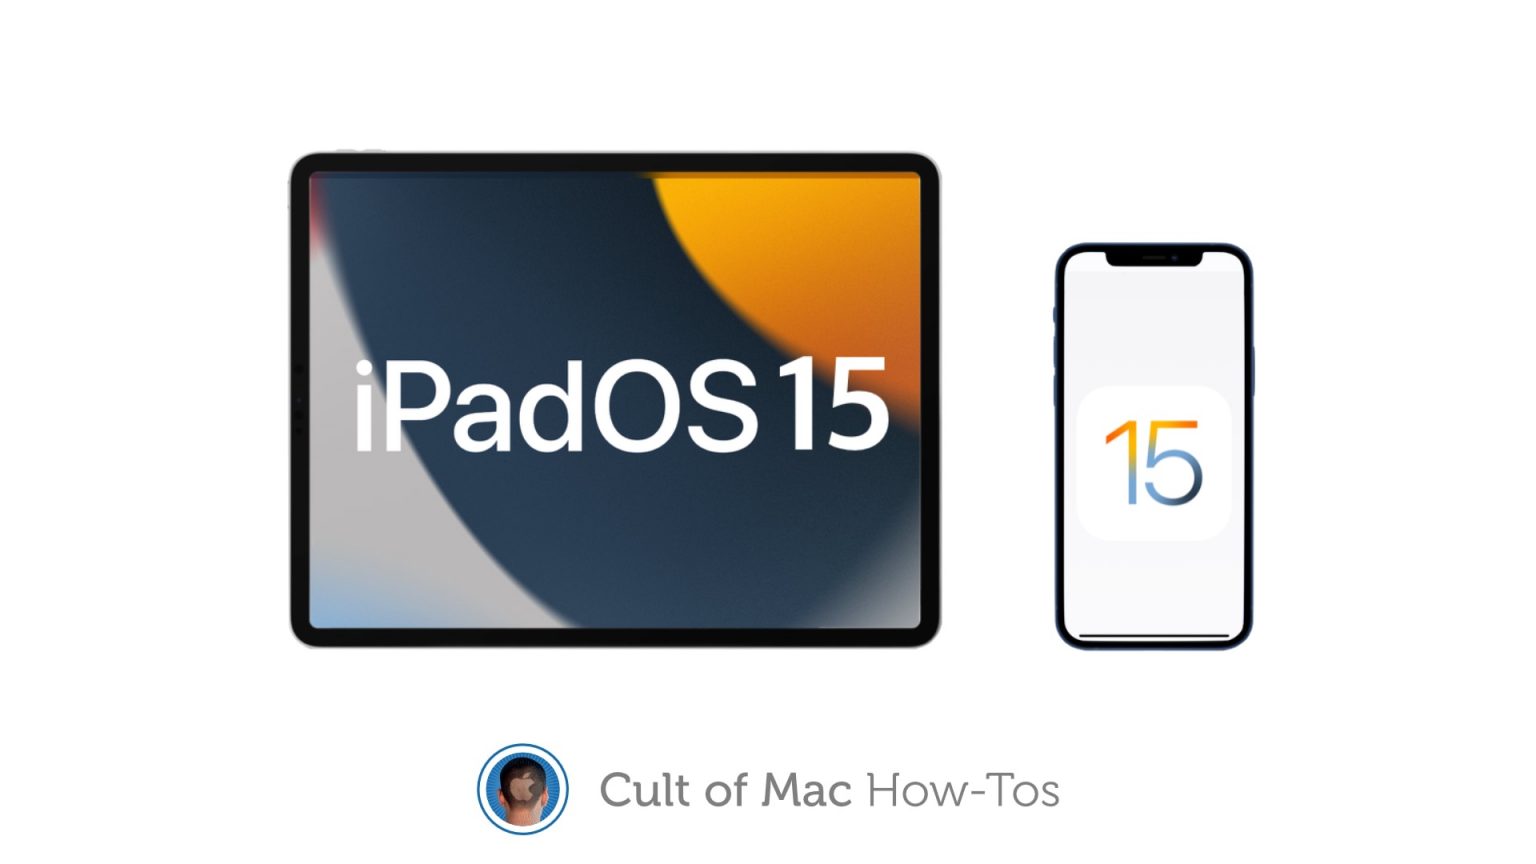 How to get the iOS 15 and iPadOS 15 public betas today